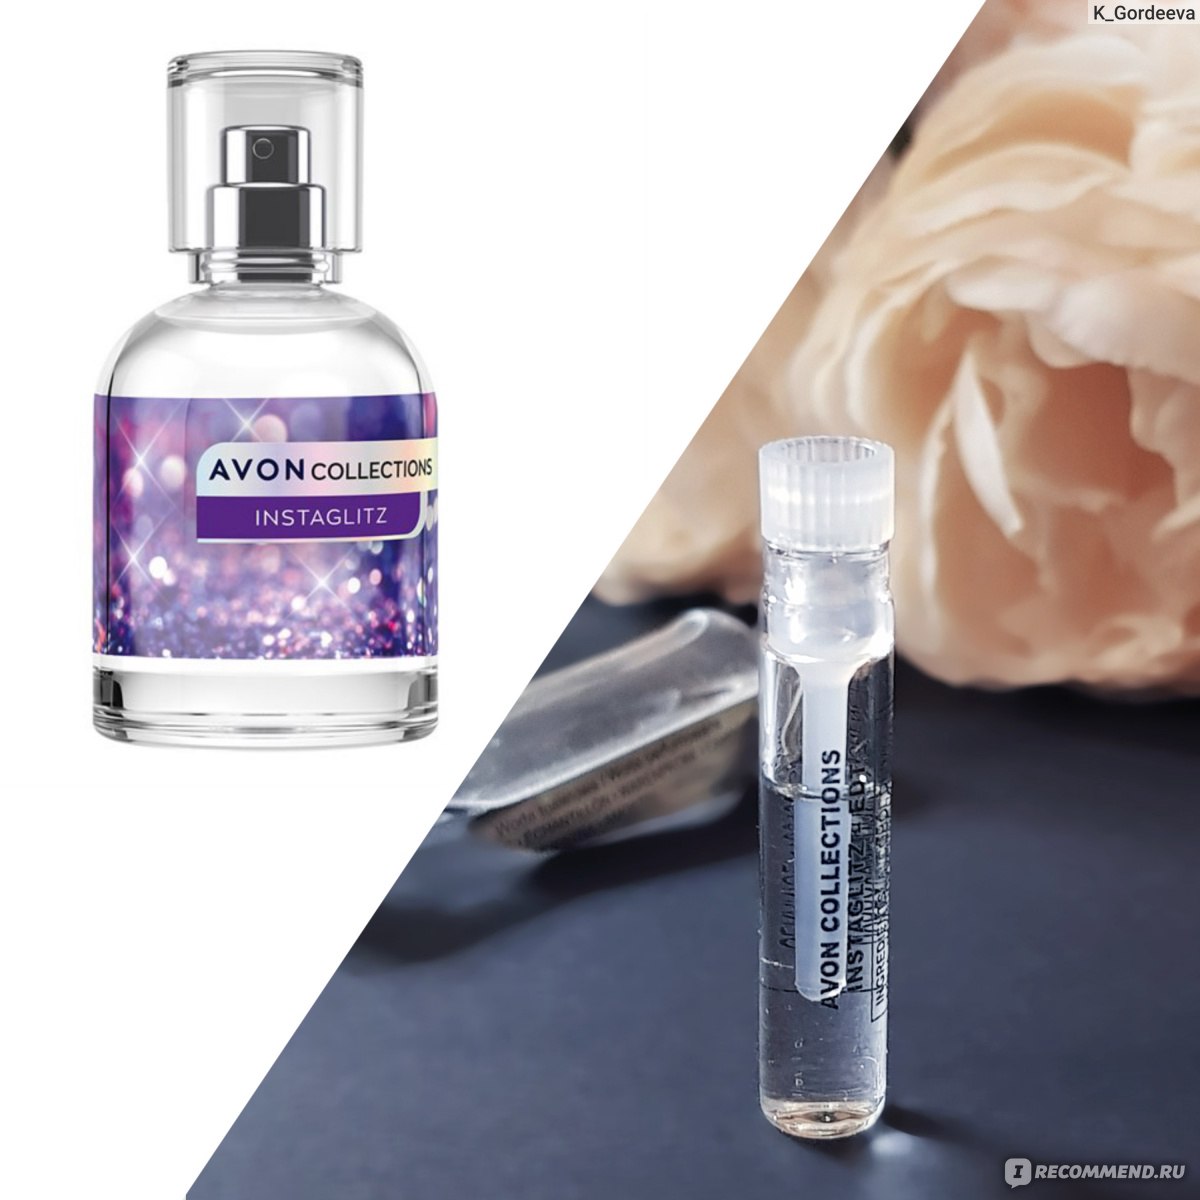 Avon collections. Туалетная вода Avon collection s instaglits. Духи Avon instaglitz. Туалетная вода Avon collections instaglitz. Туалетная вода эйвон collections GLAMSTYLE.